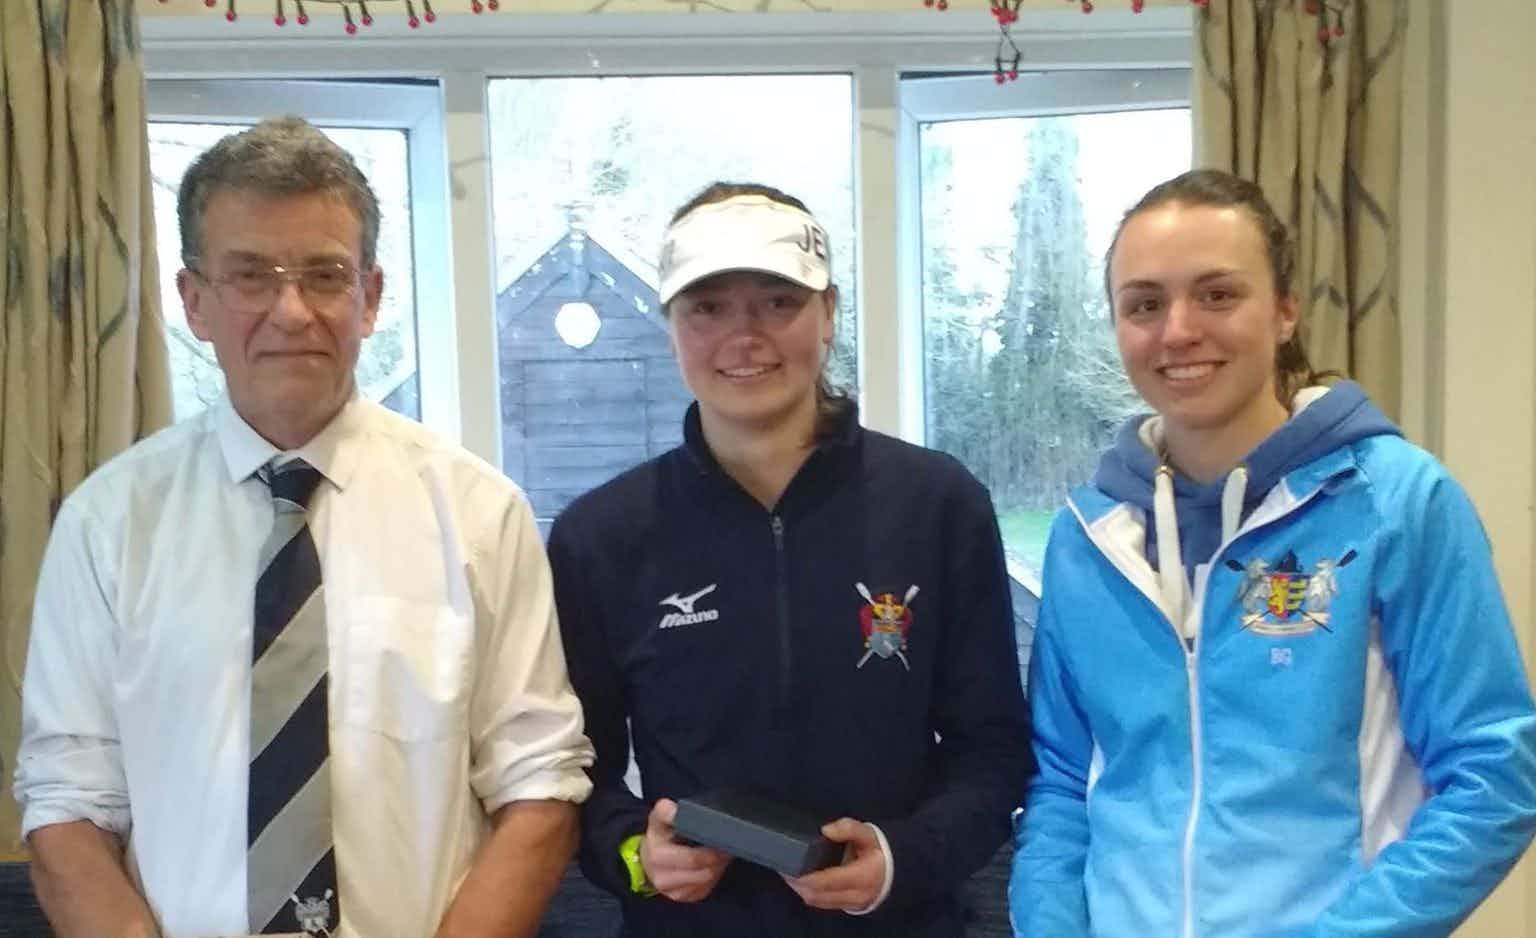 Andrew Blit (Chair of Eastern Region Rowing Council), presenting Jen Titterington and Bev Goodchild (IPS) with their prizes.